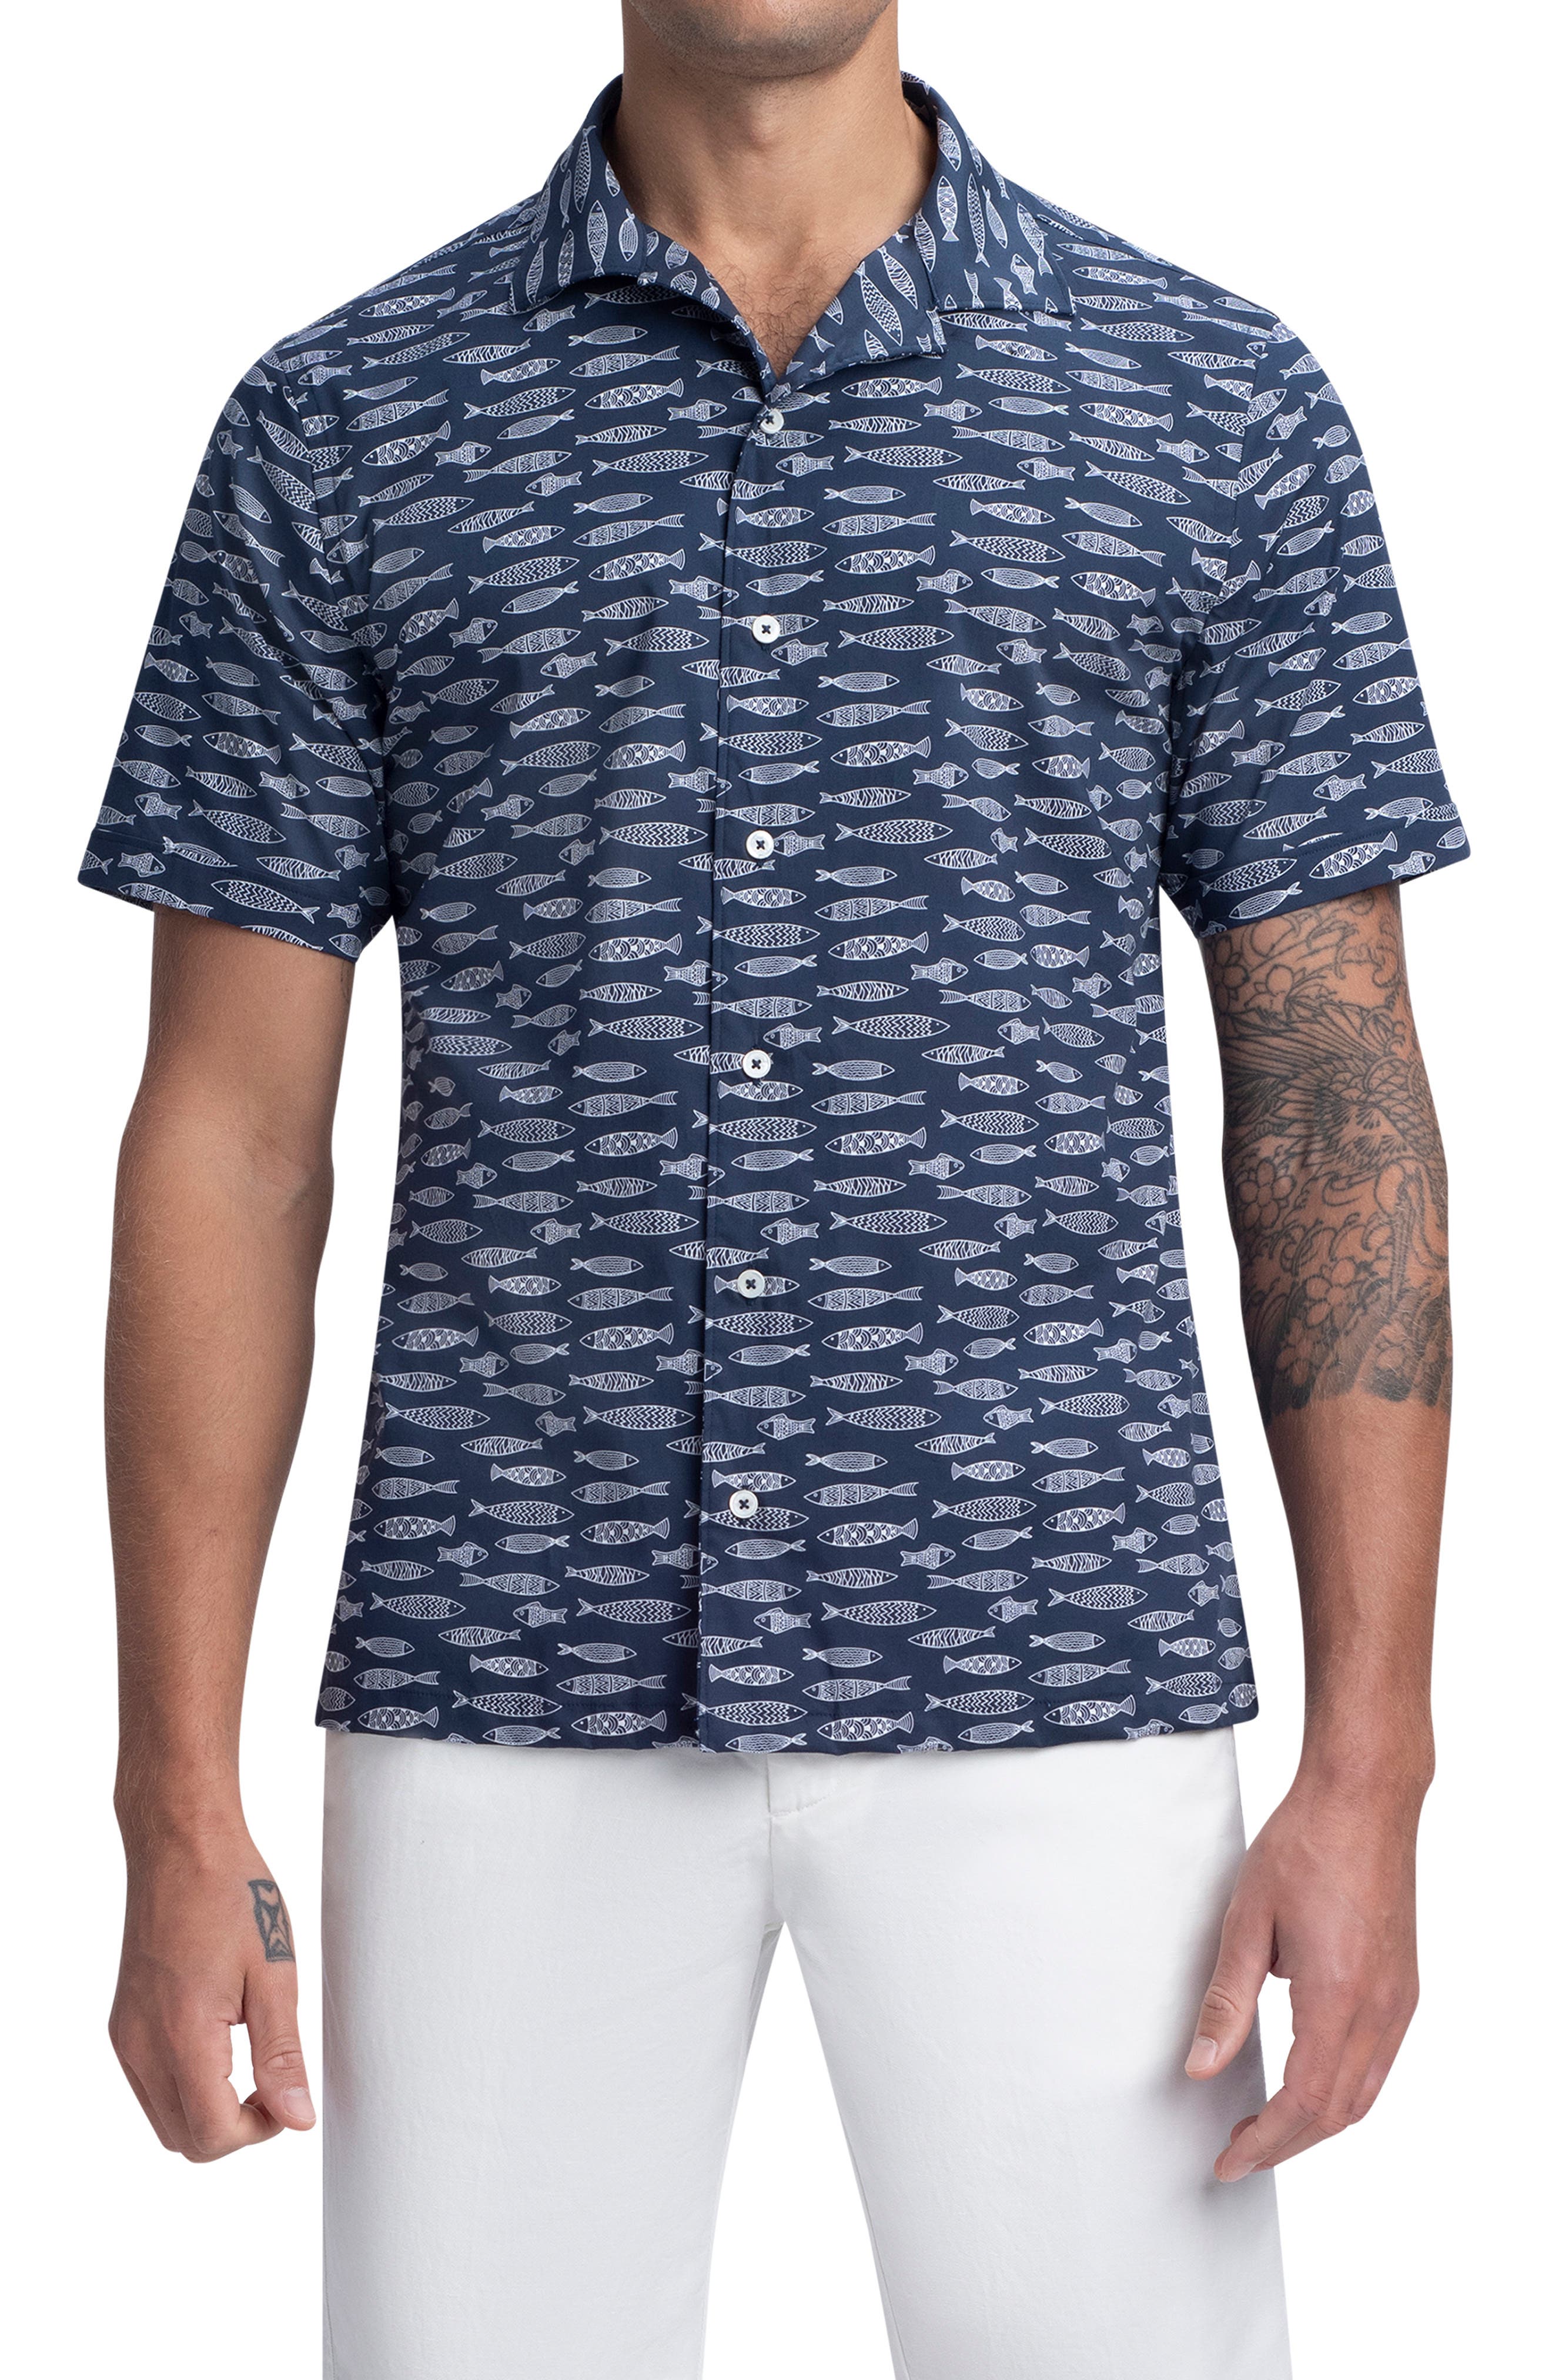 Izod Surfcaster Short Sleeve Button Down Patterned Fishing Shirt